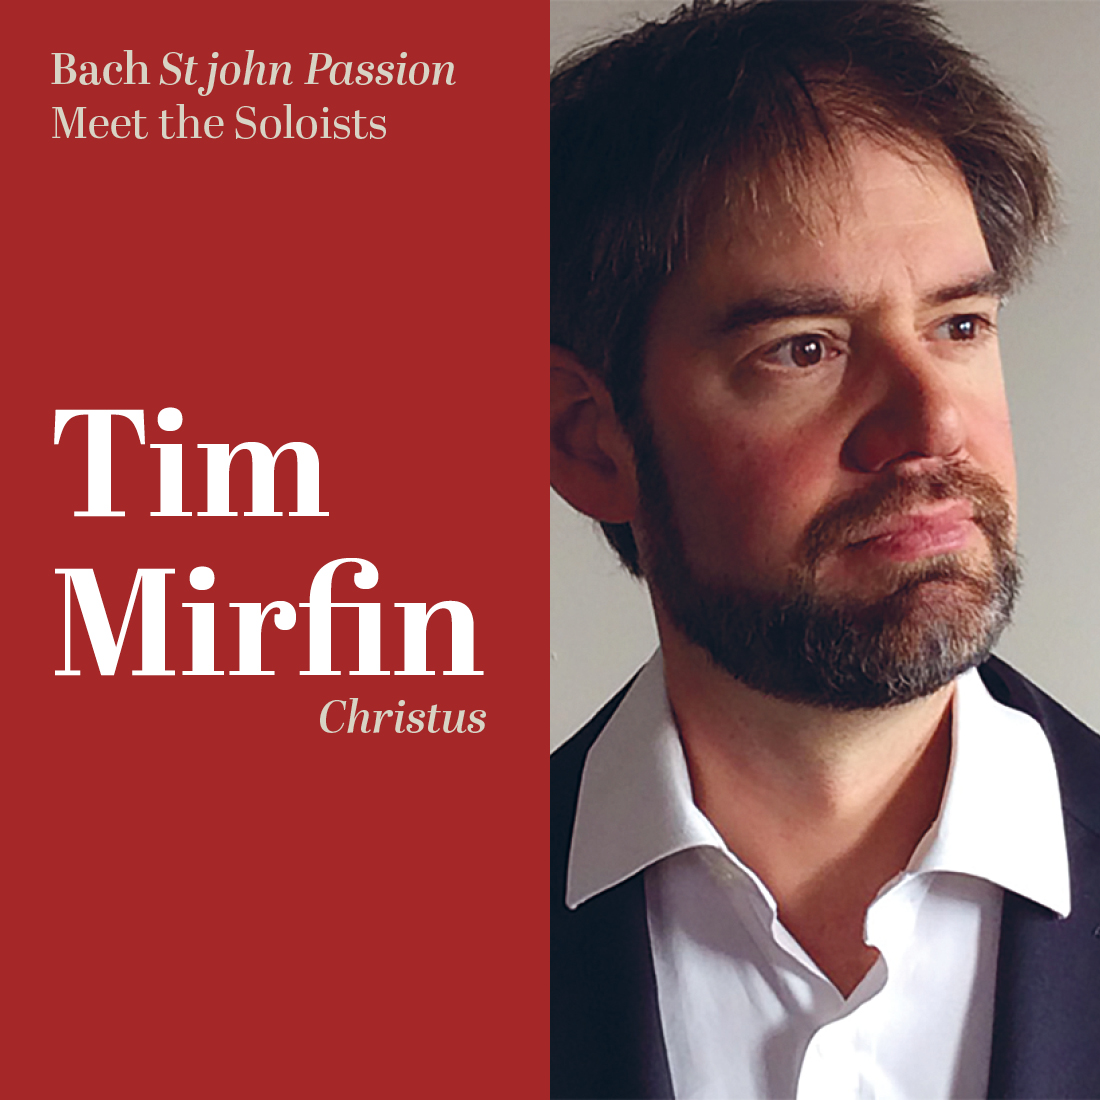 Tim Mirfin will be performing the role of Christus in our upcoming performance of Bach’s St John Passion. Tim has performed major opera roles and has a wide and varied concert repertoire. Find out more at bit.ly/stjohn-passion #ExeterCathedral @ECSPrepSchool